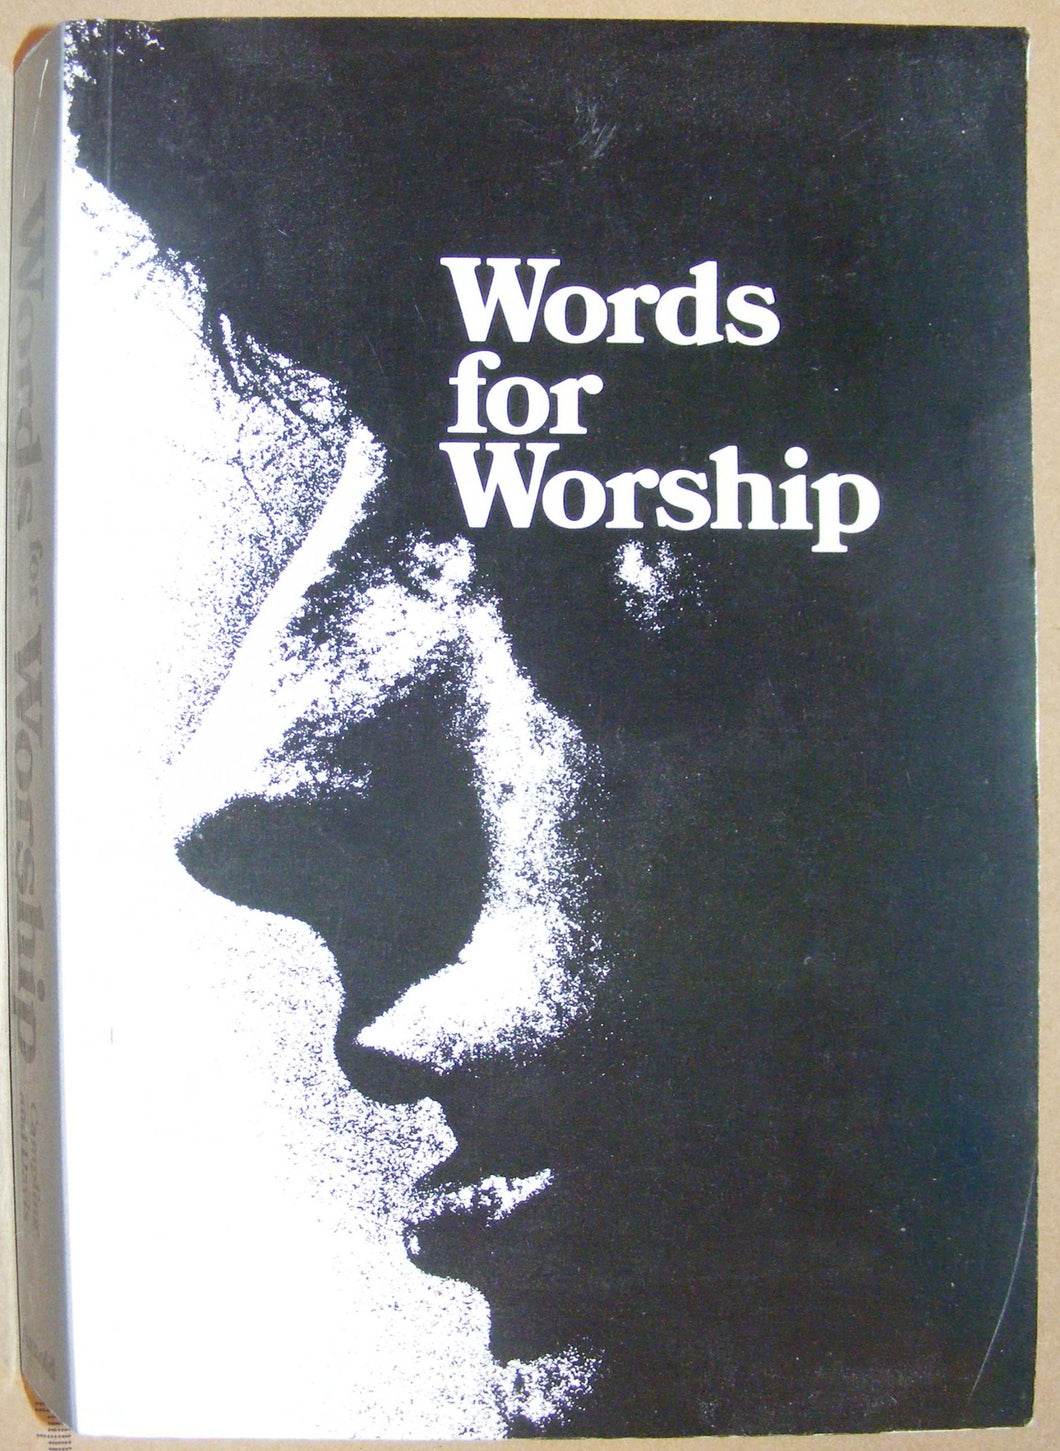 Words for Worship